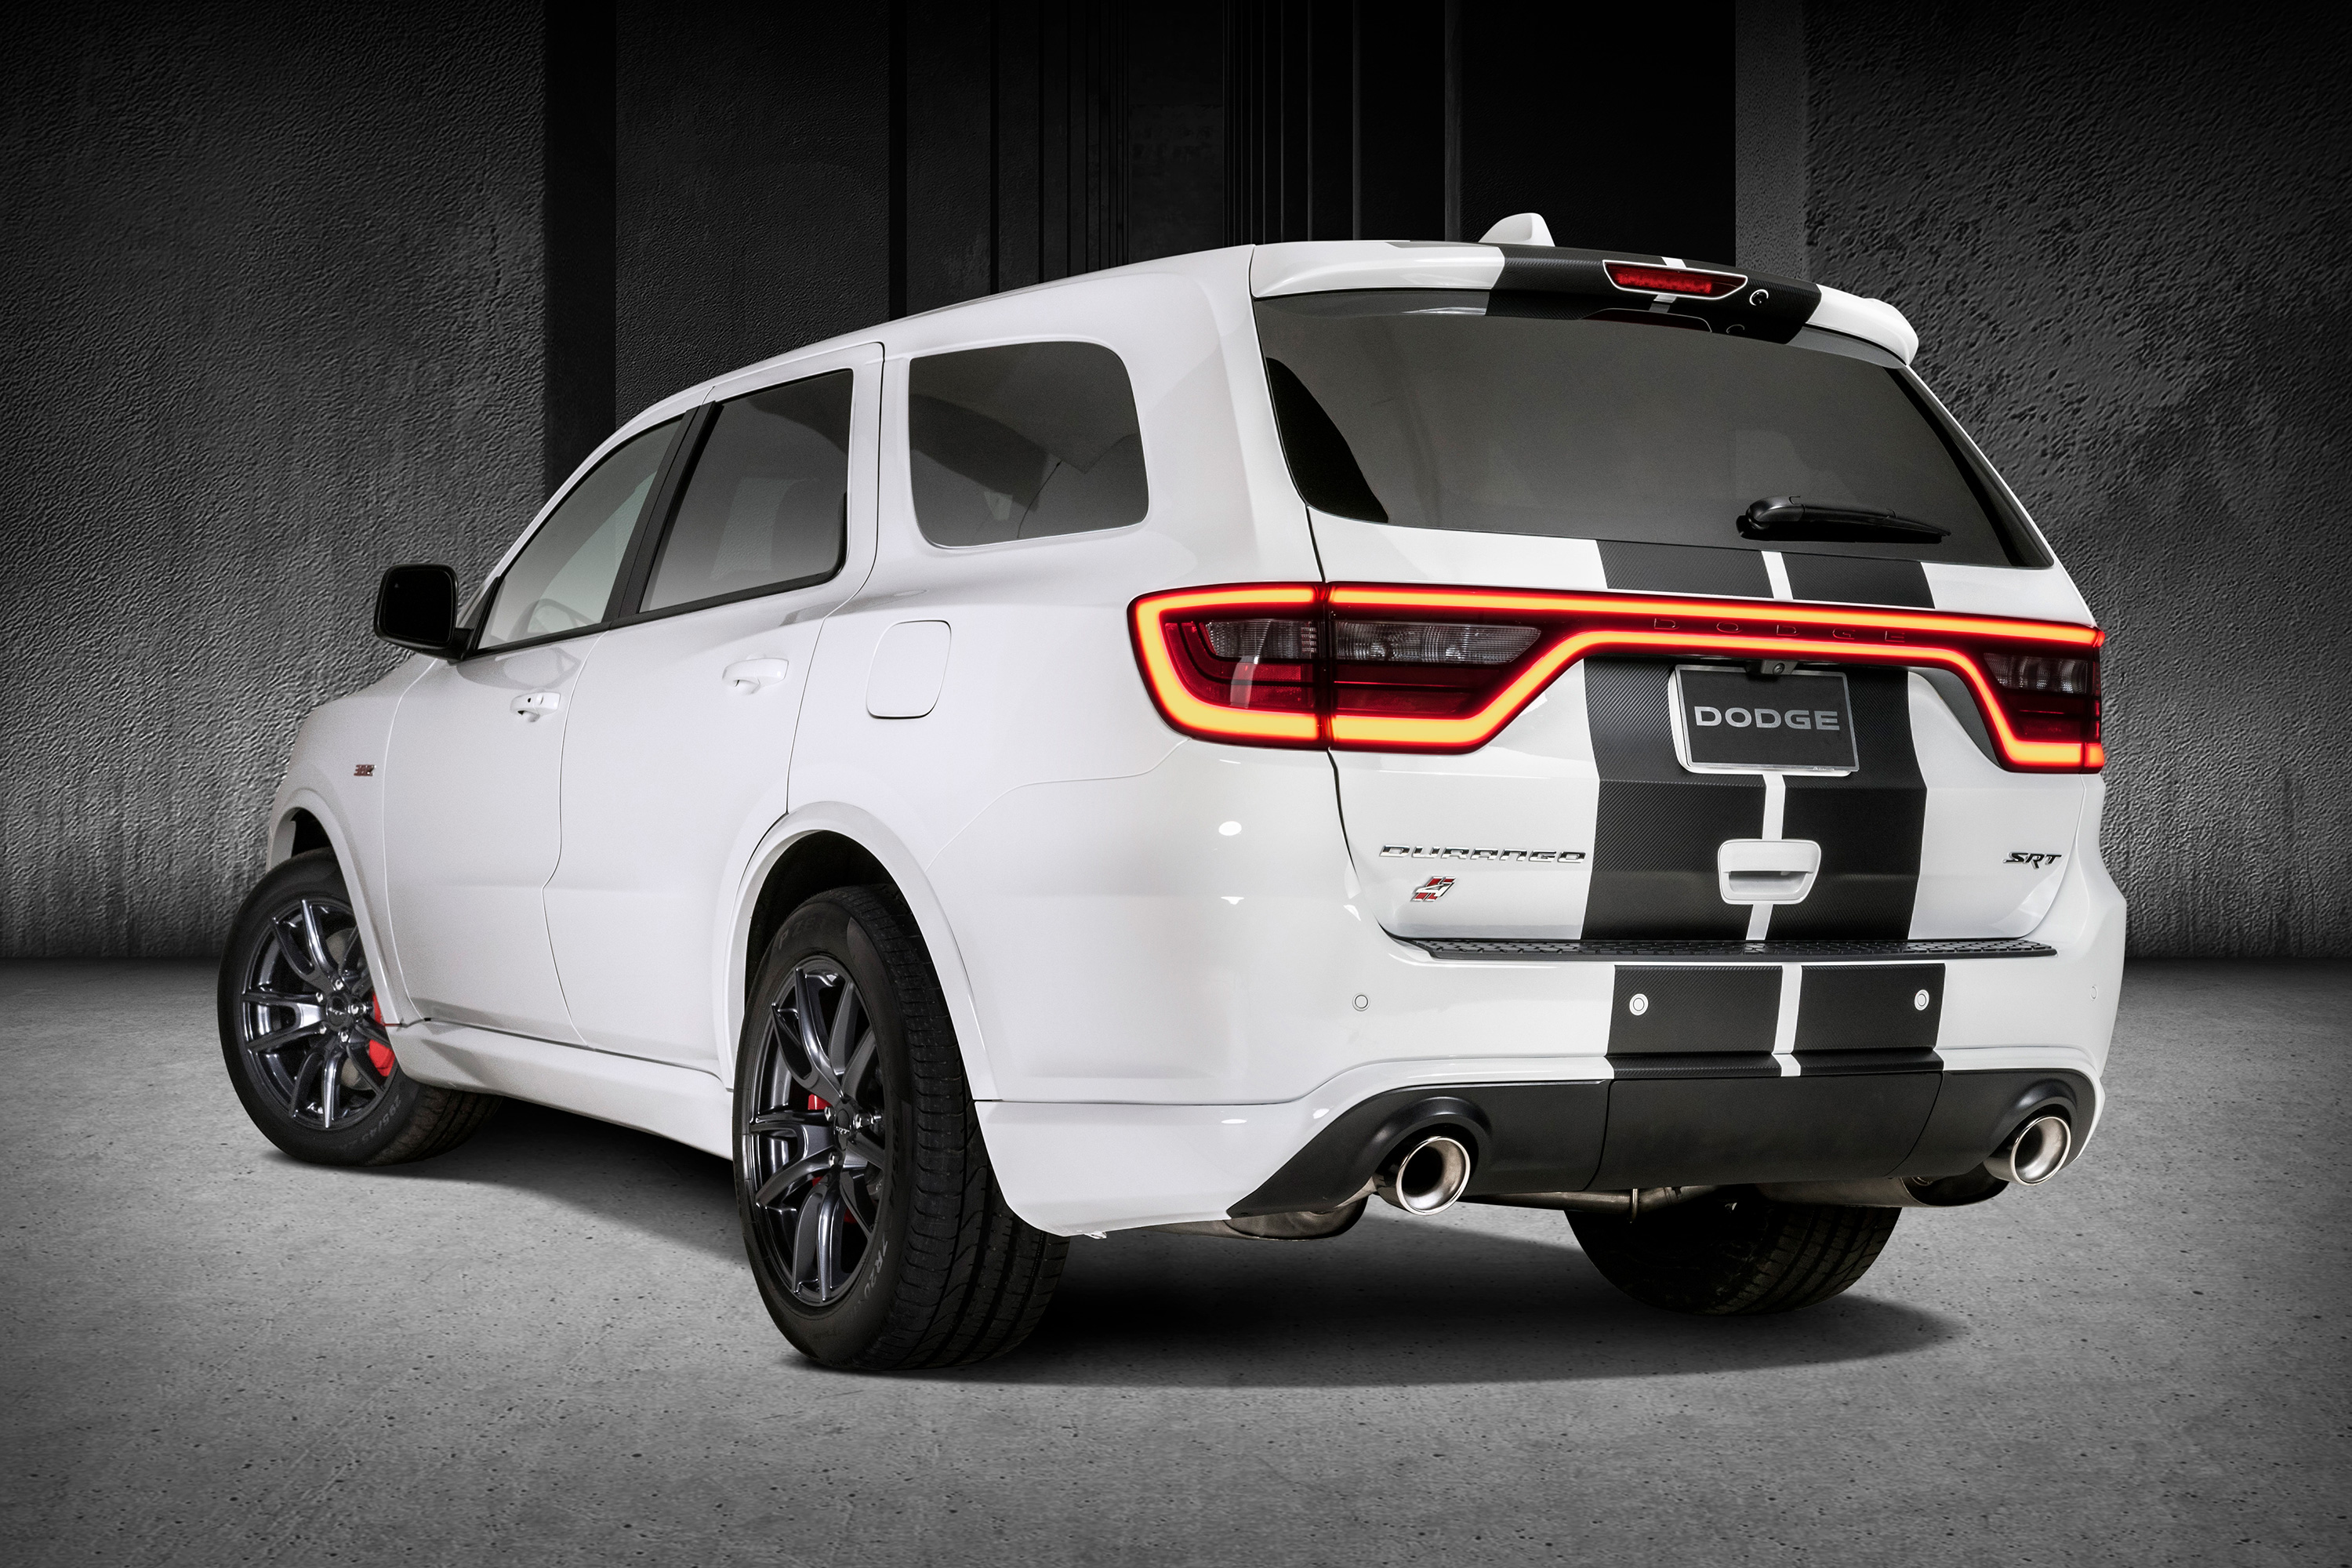 Wallpapers dodge durango white car view from behind on the desktop